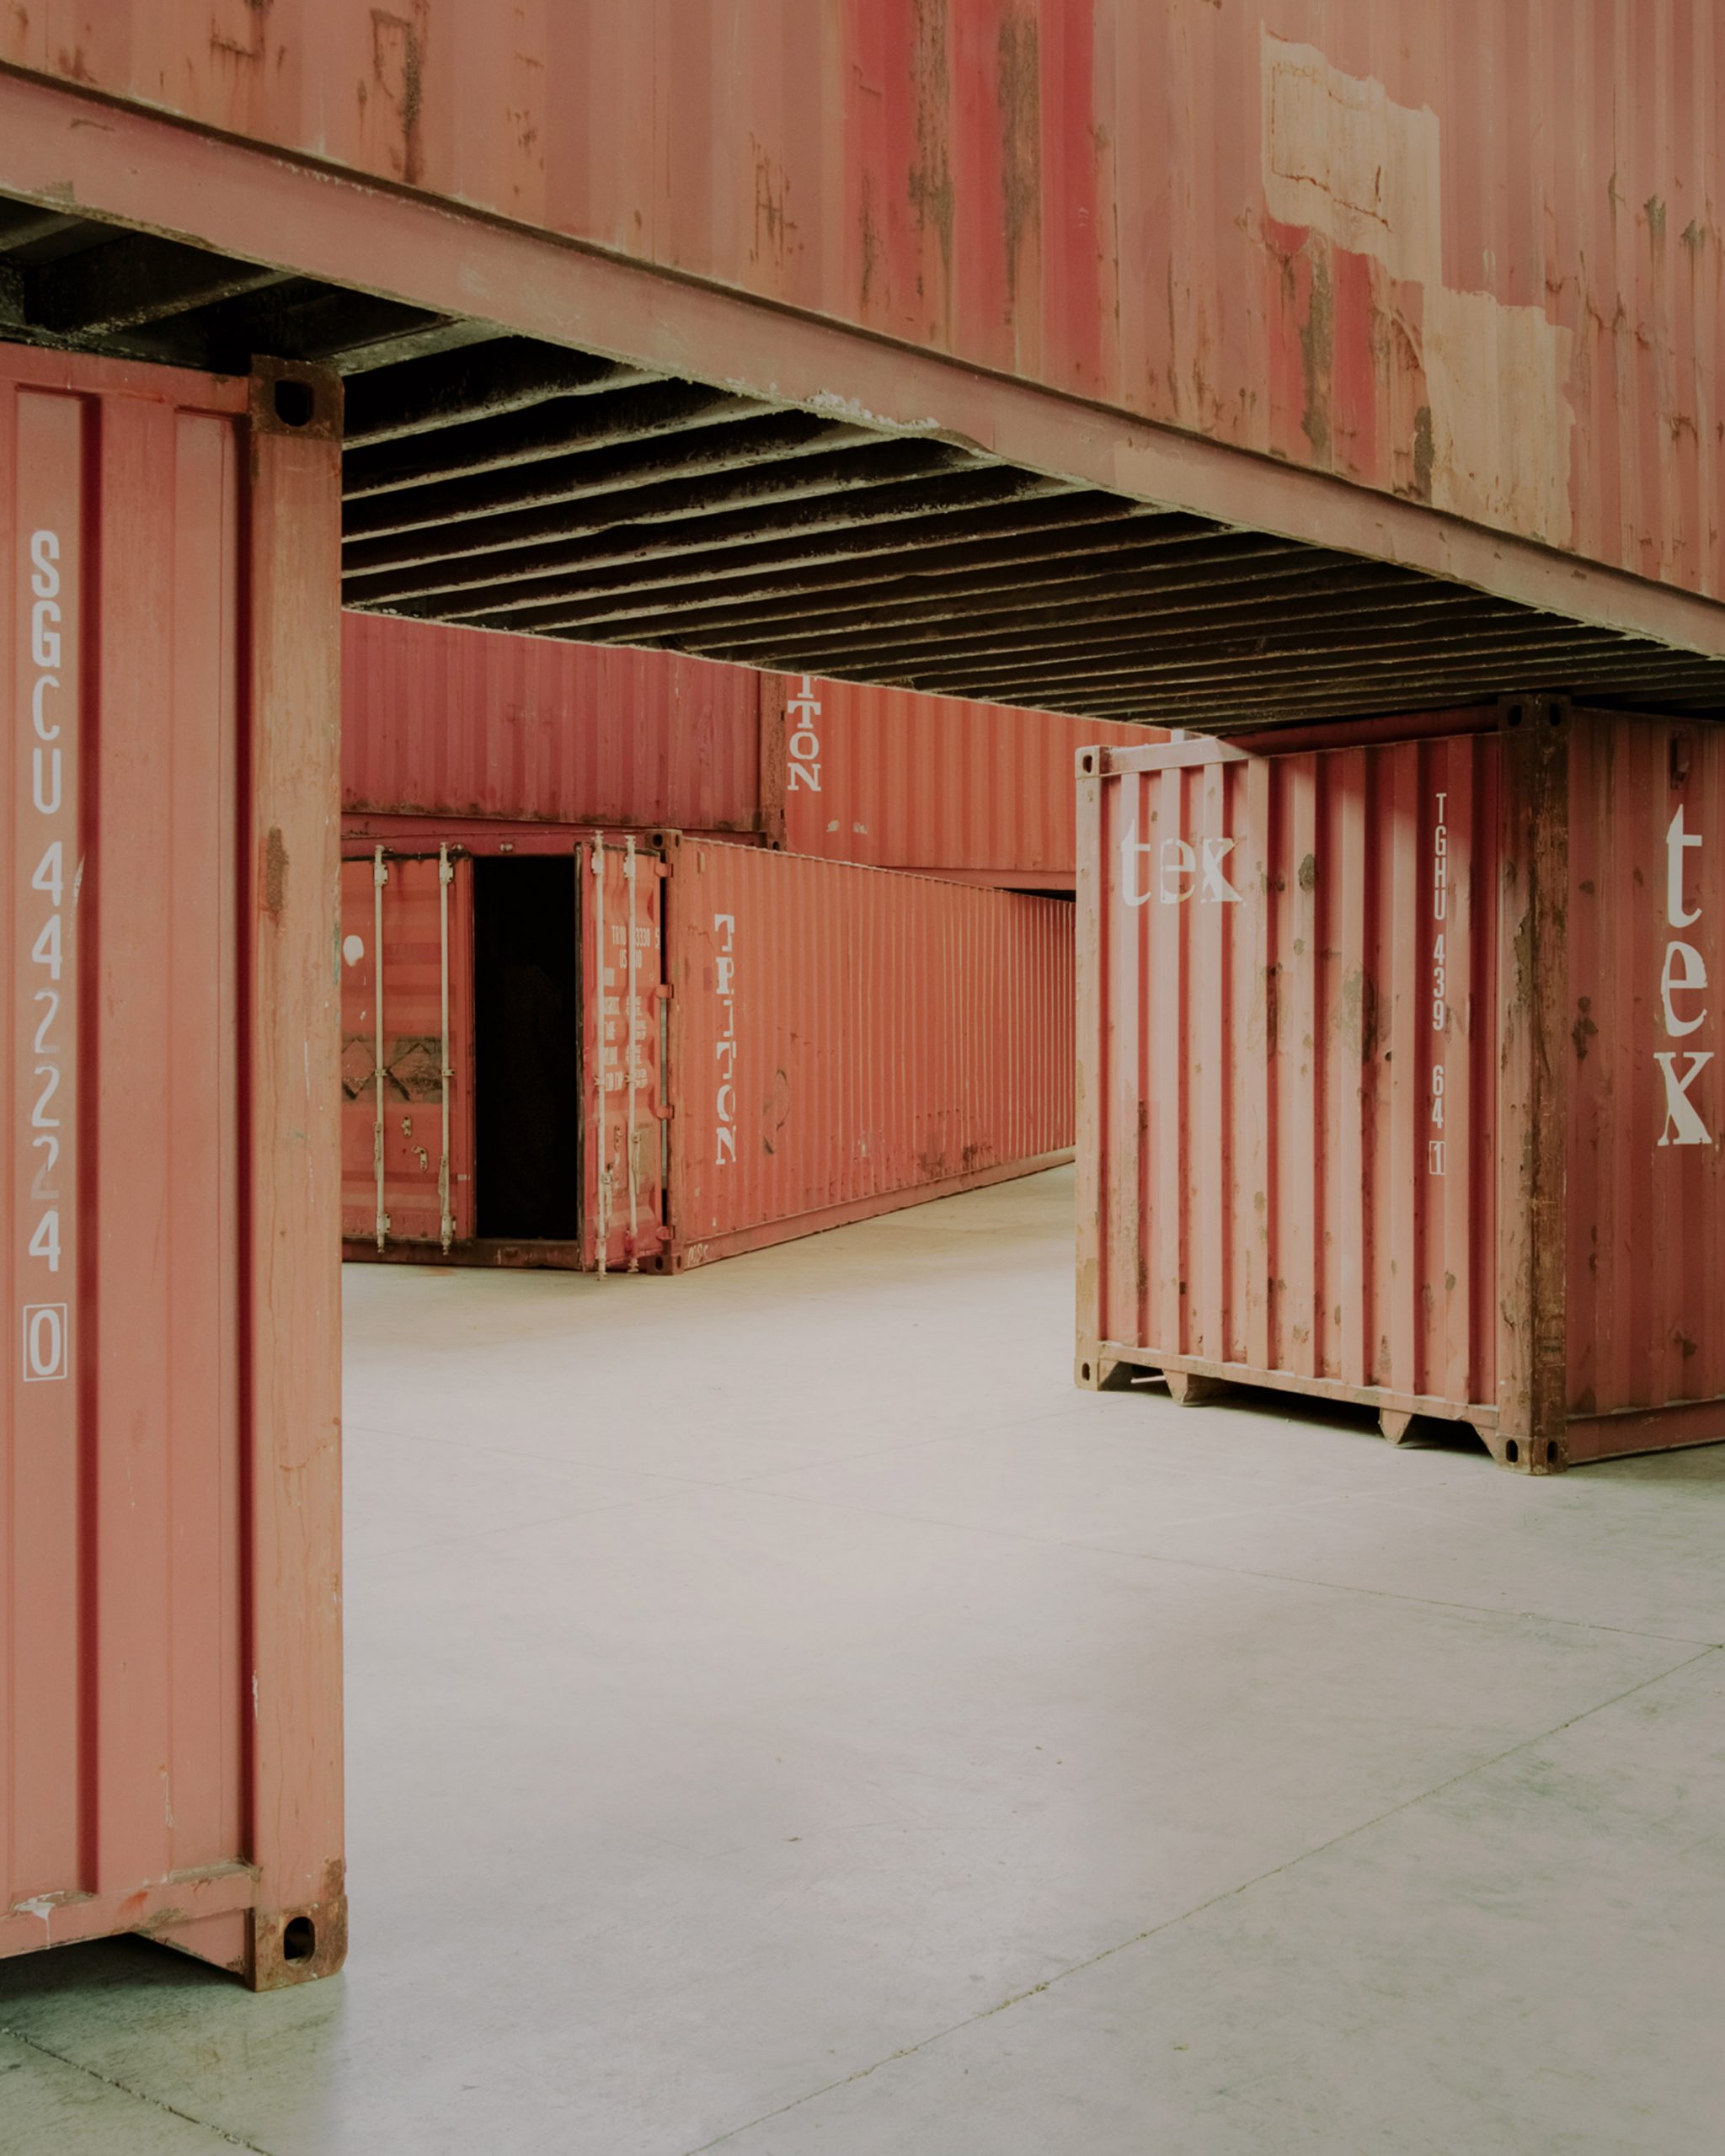 Shipping container installation